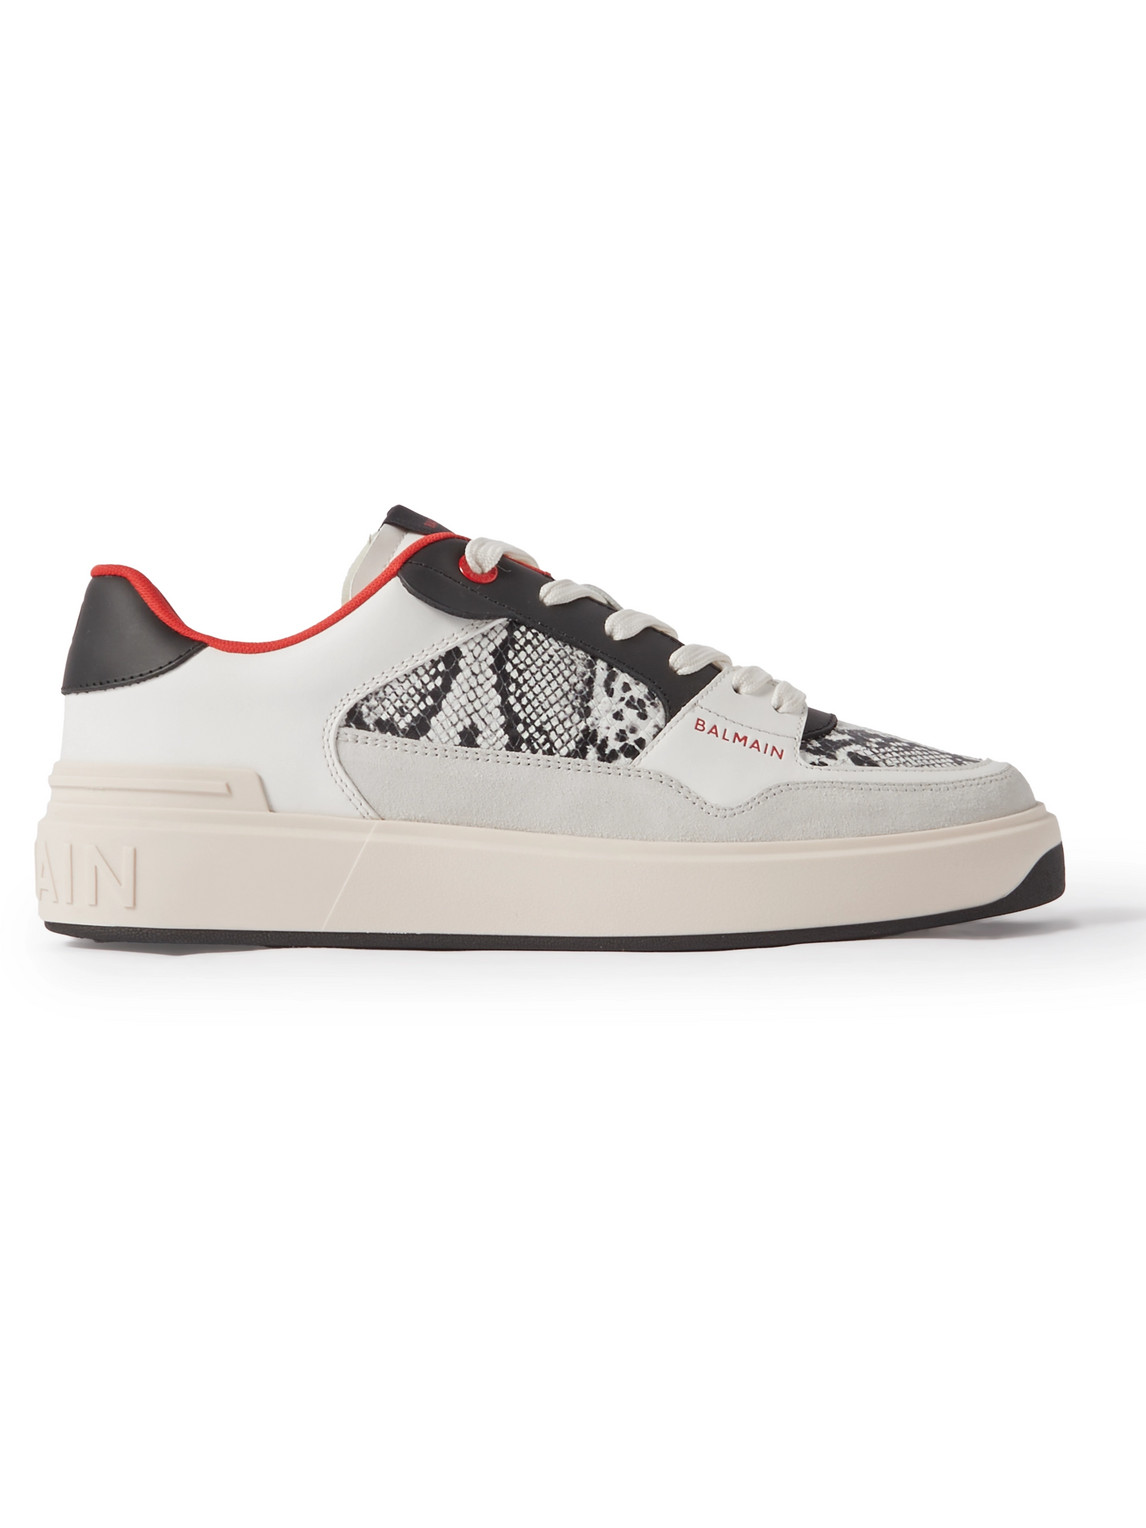 Balmain Men's B-court Flip Snake-effect Leather Low-top Trainers In White